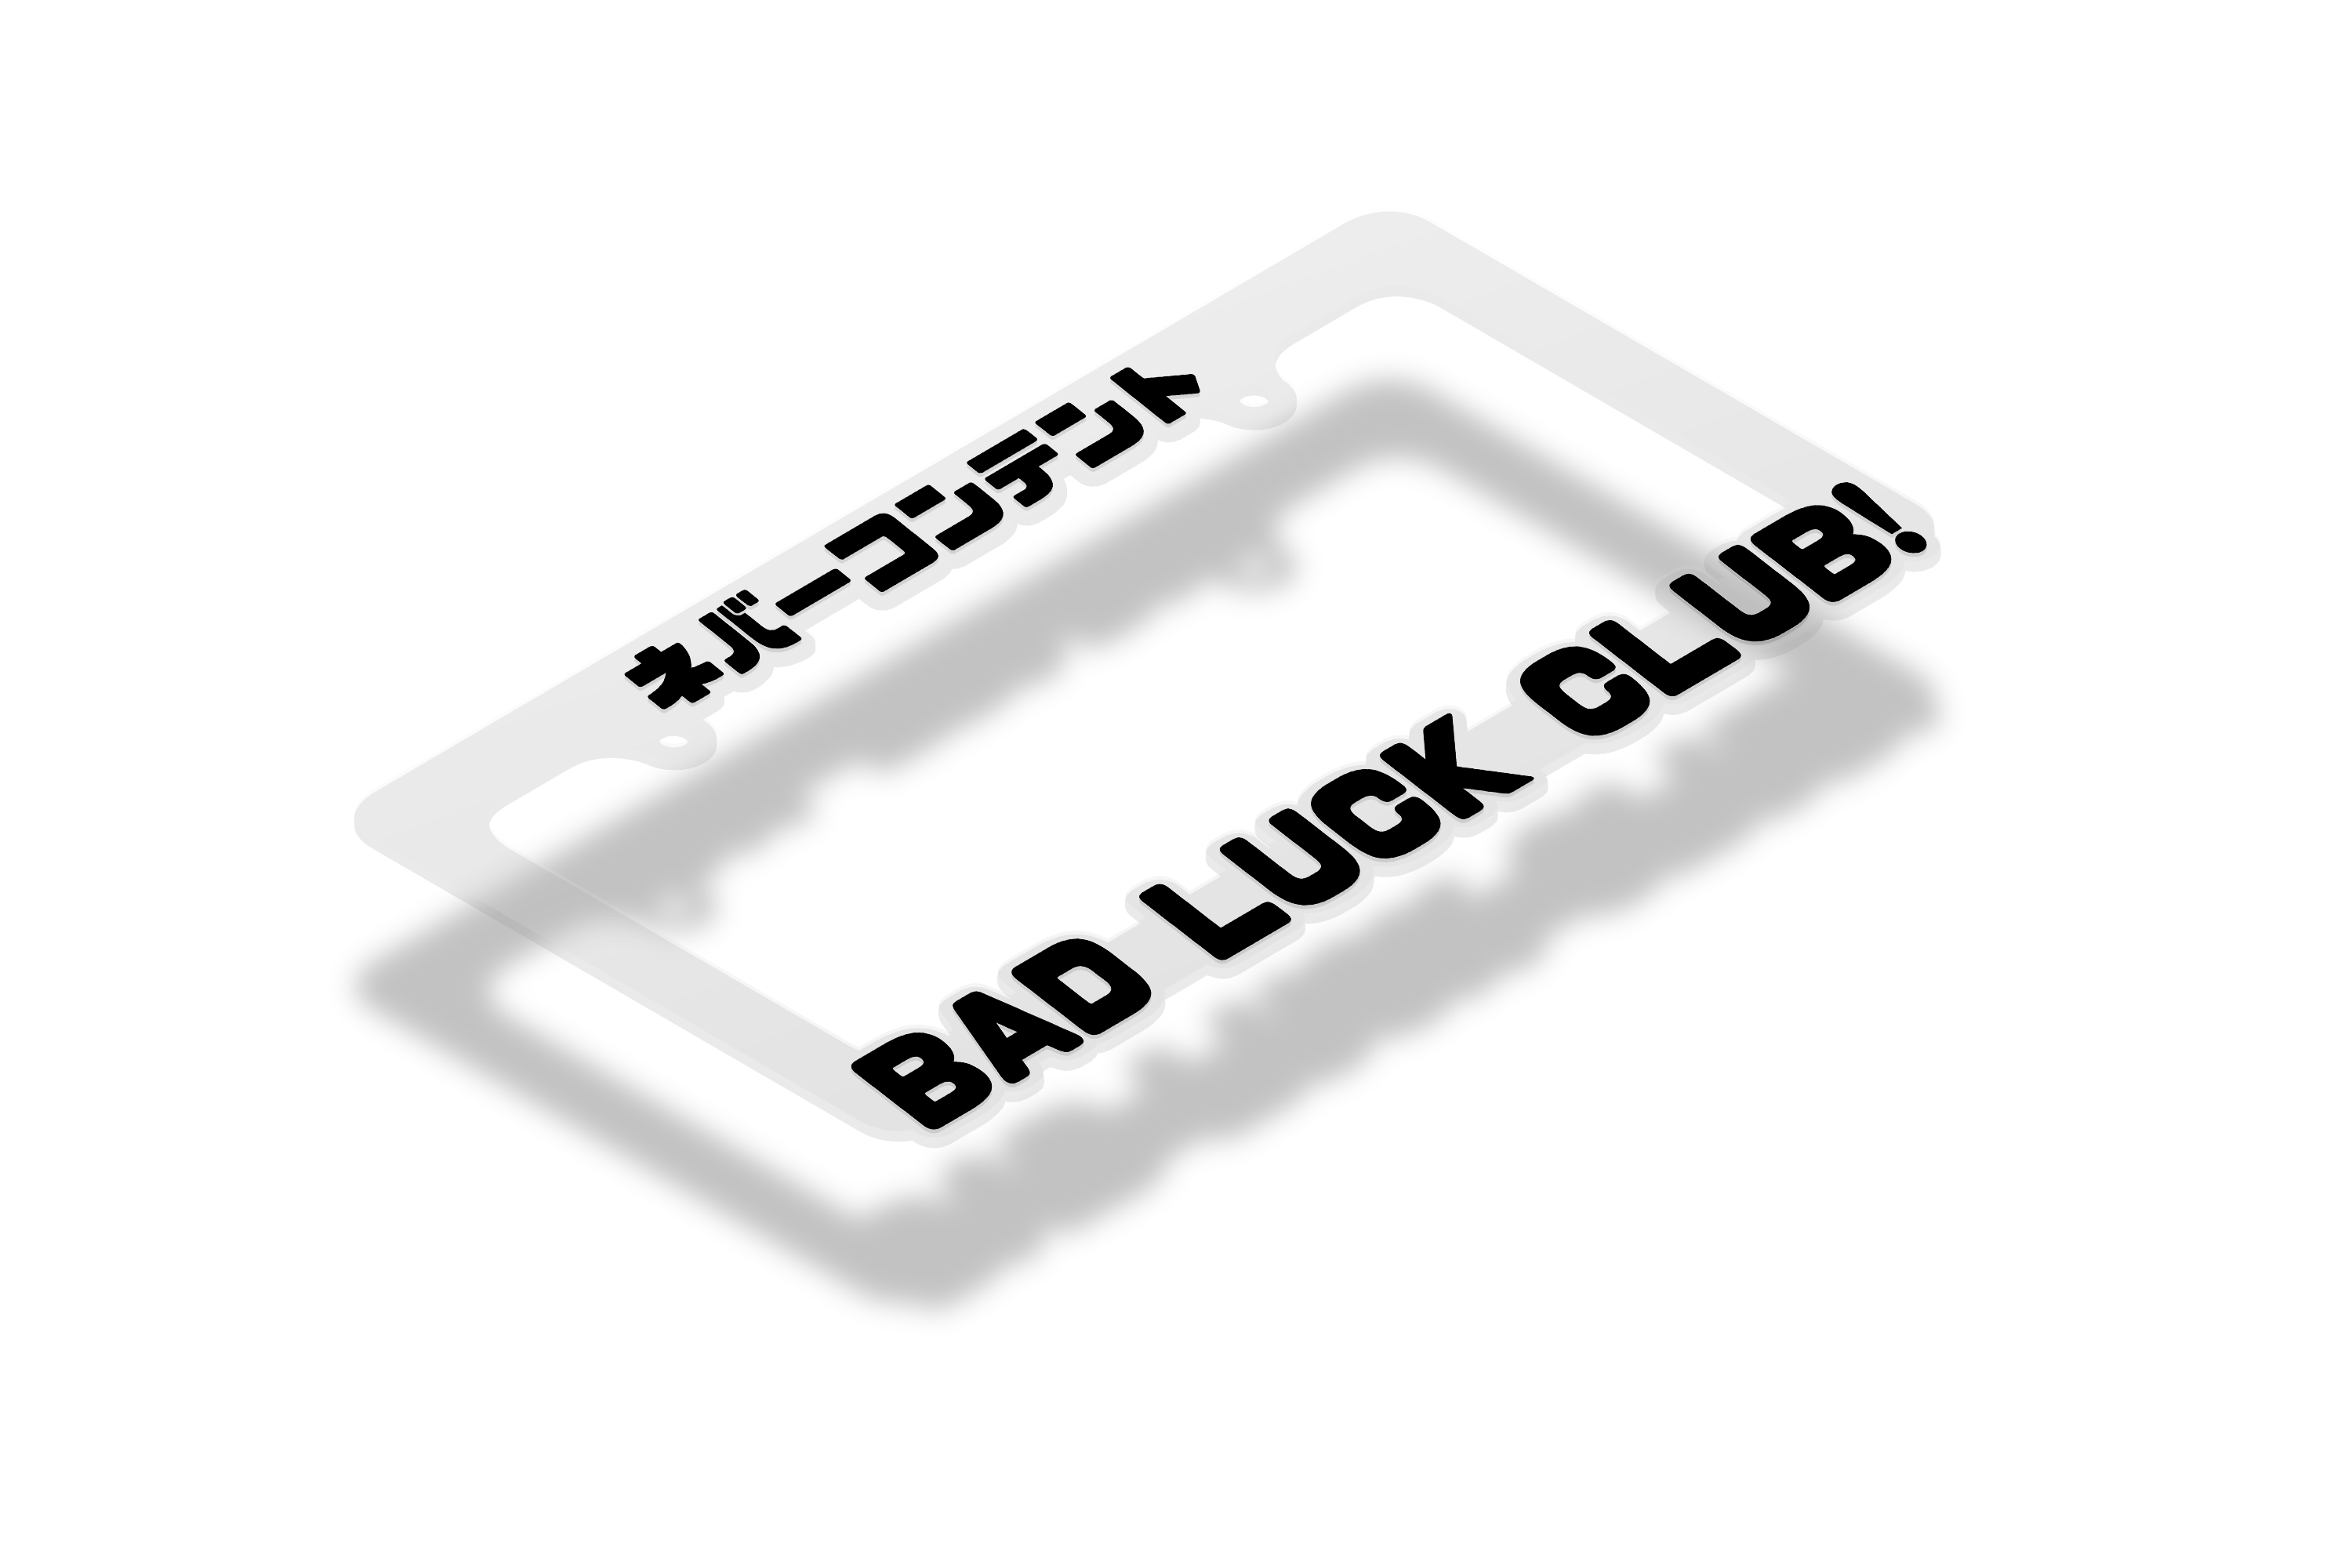 Bad Luck Club! - Frosted Clear License Plate Frame (BLACK)